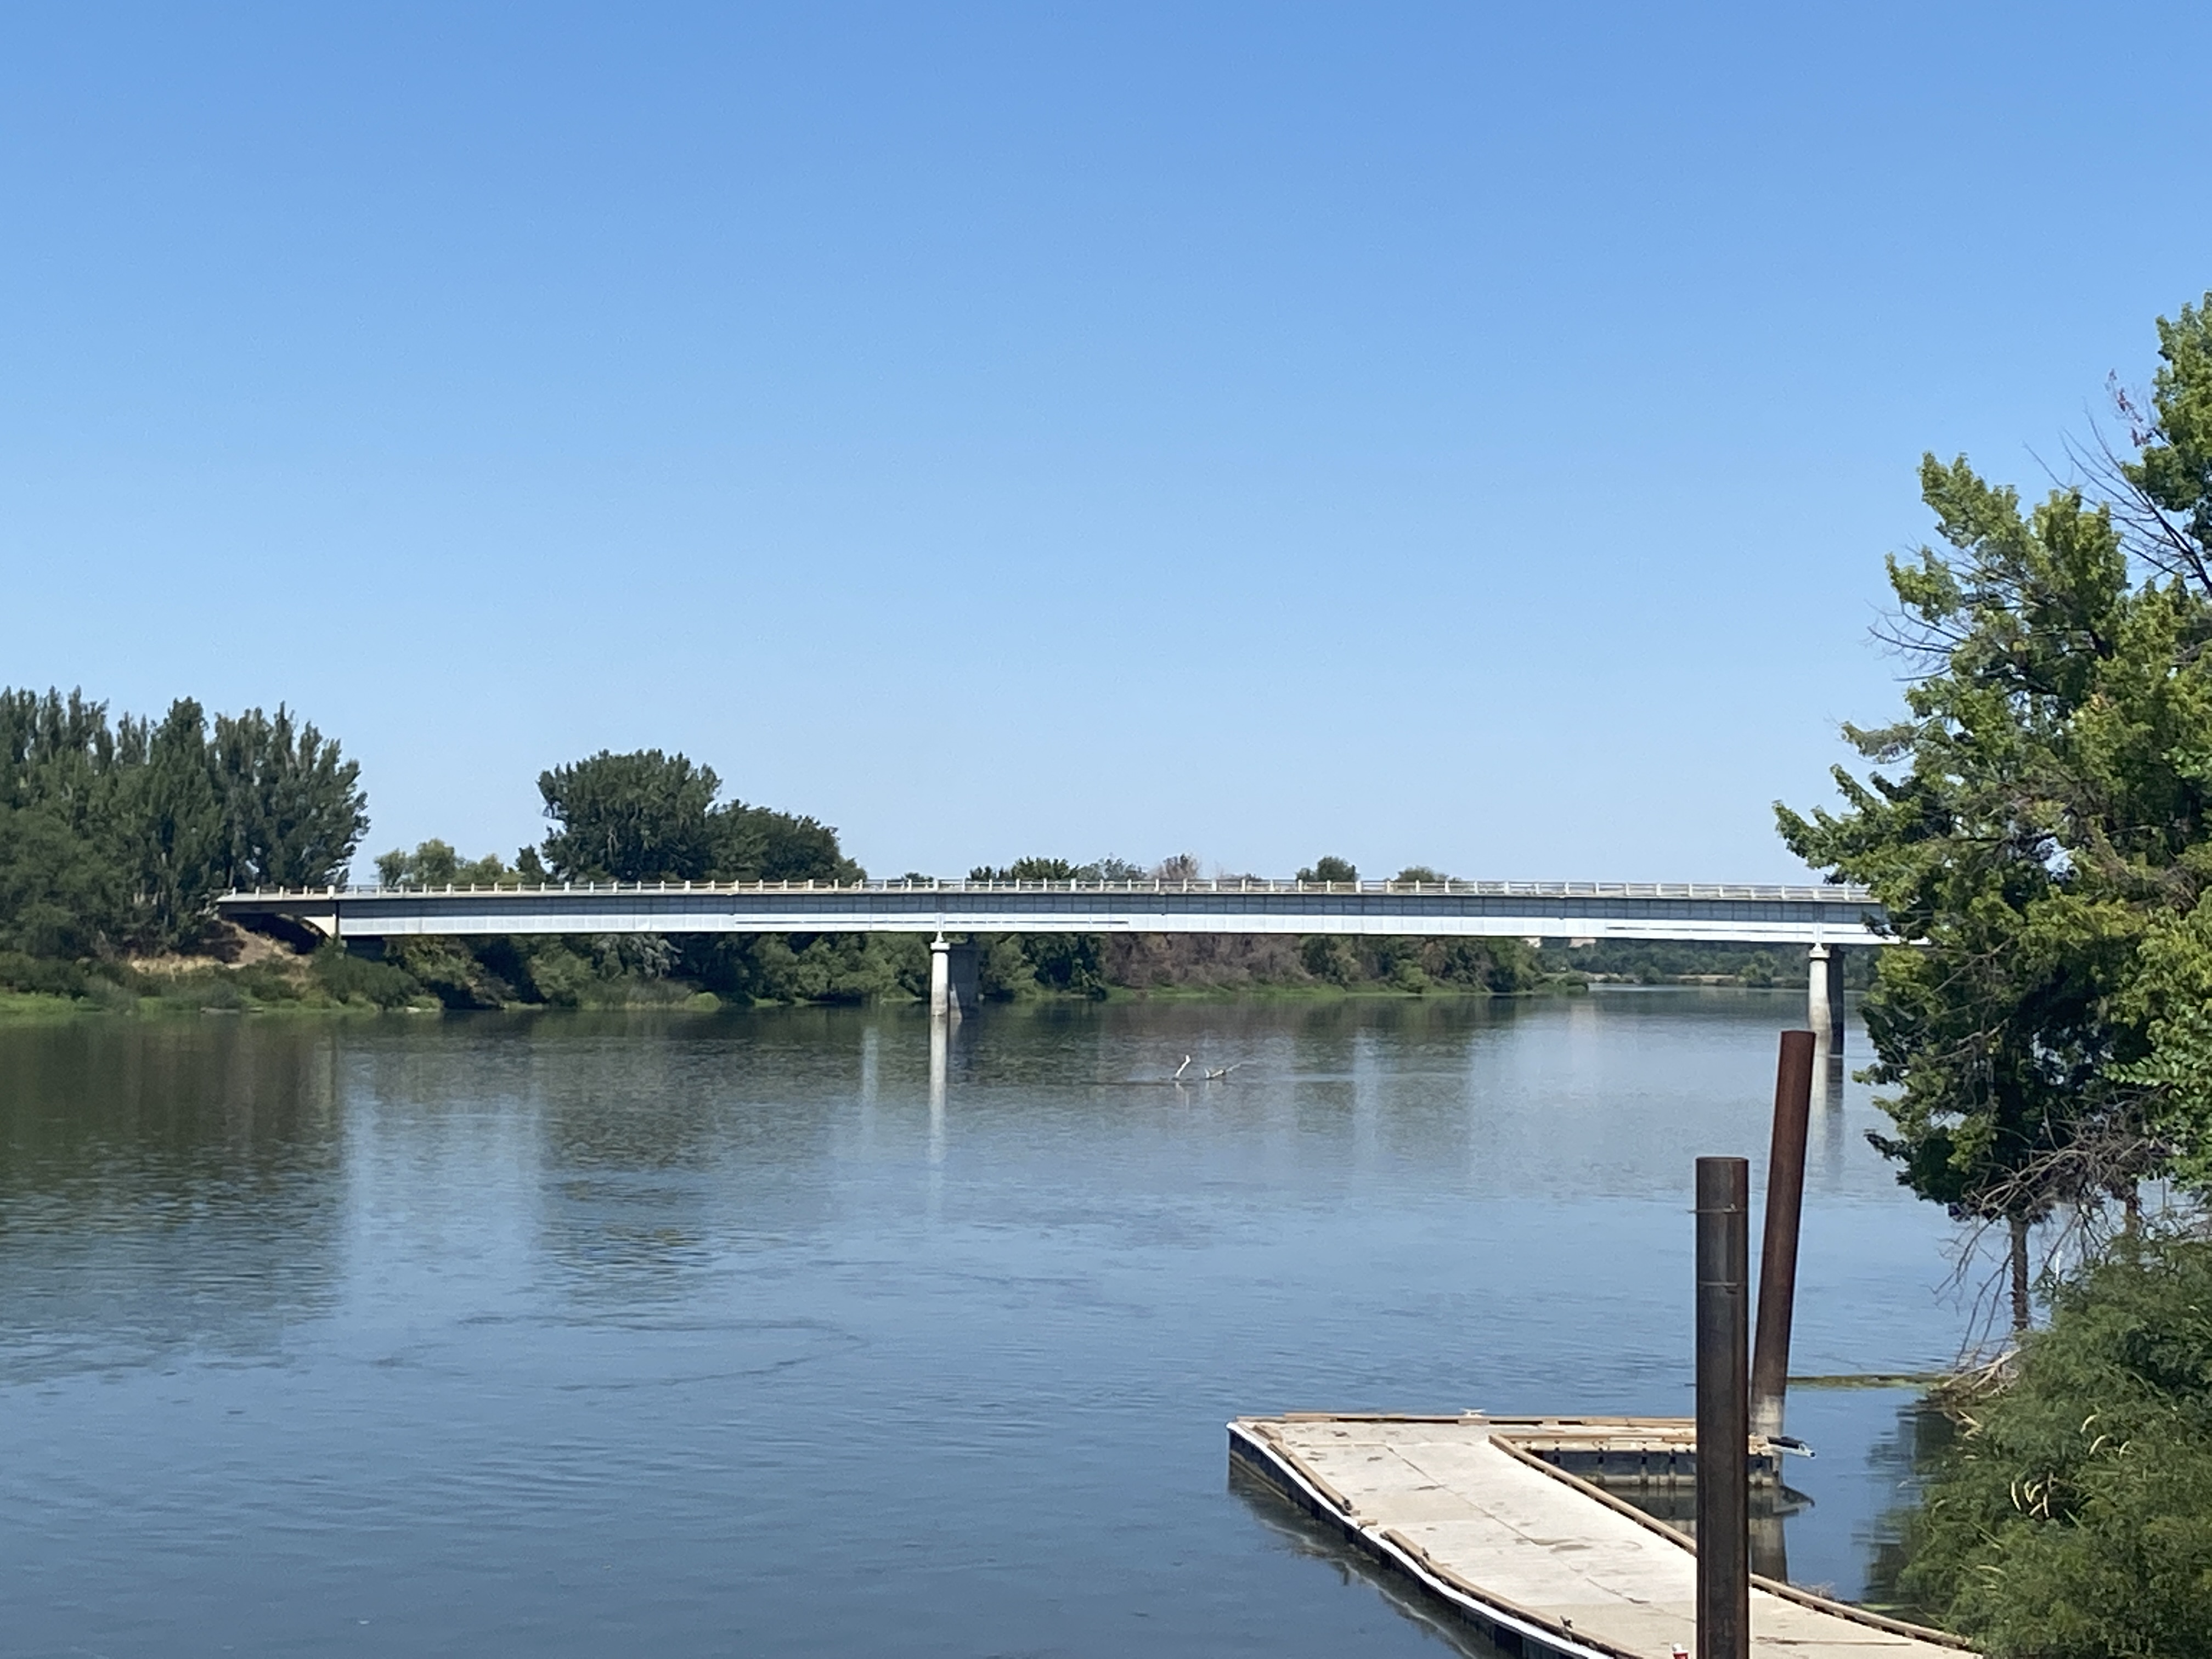 View from water level of SH-52 bridge over Snake River. A floating dock is in the foreground.